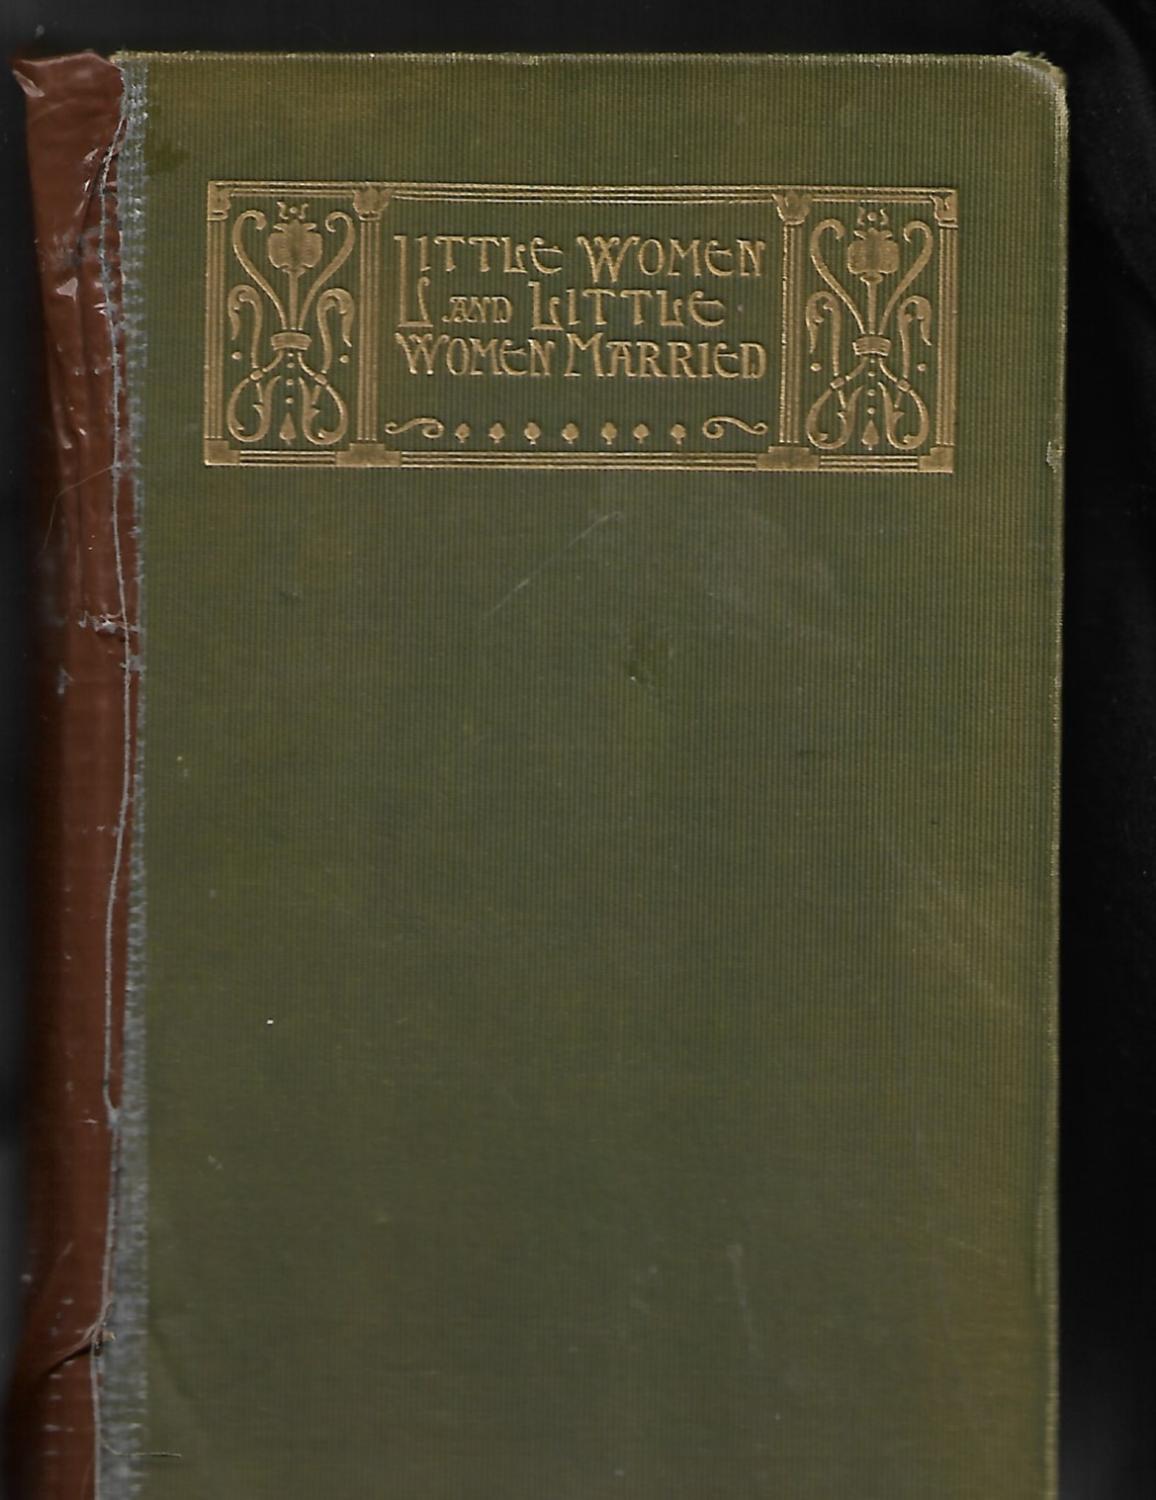 Little Women and Little Women Married by Louisa May Alcott: Fair Olive Green Cloth Boards ...